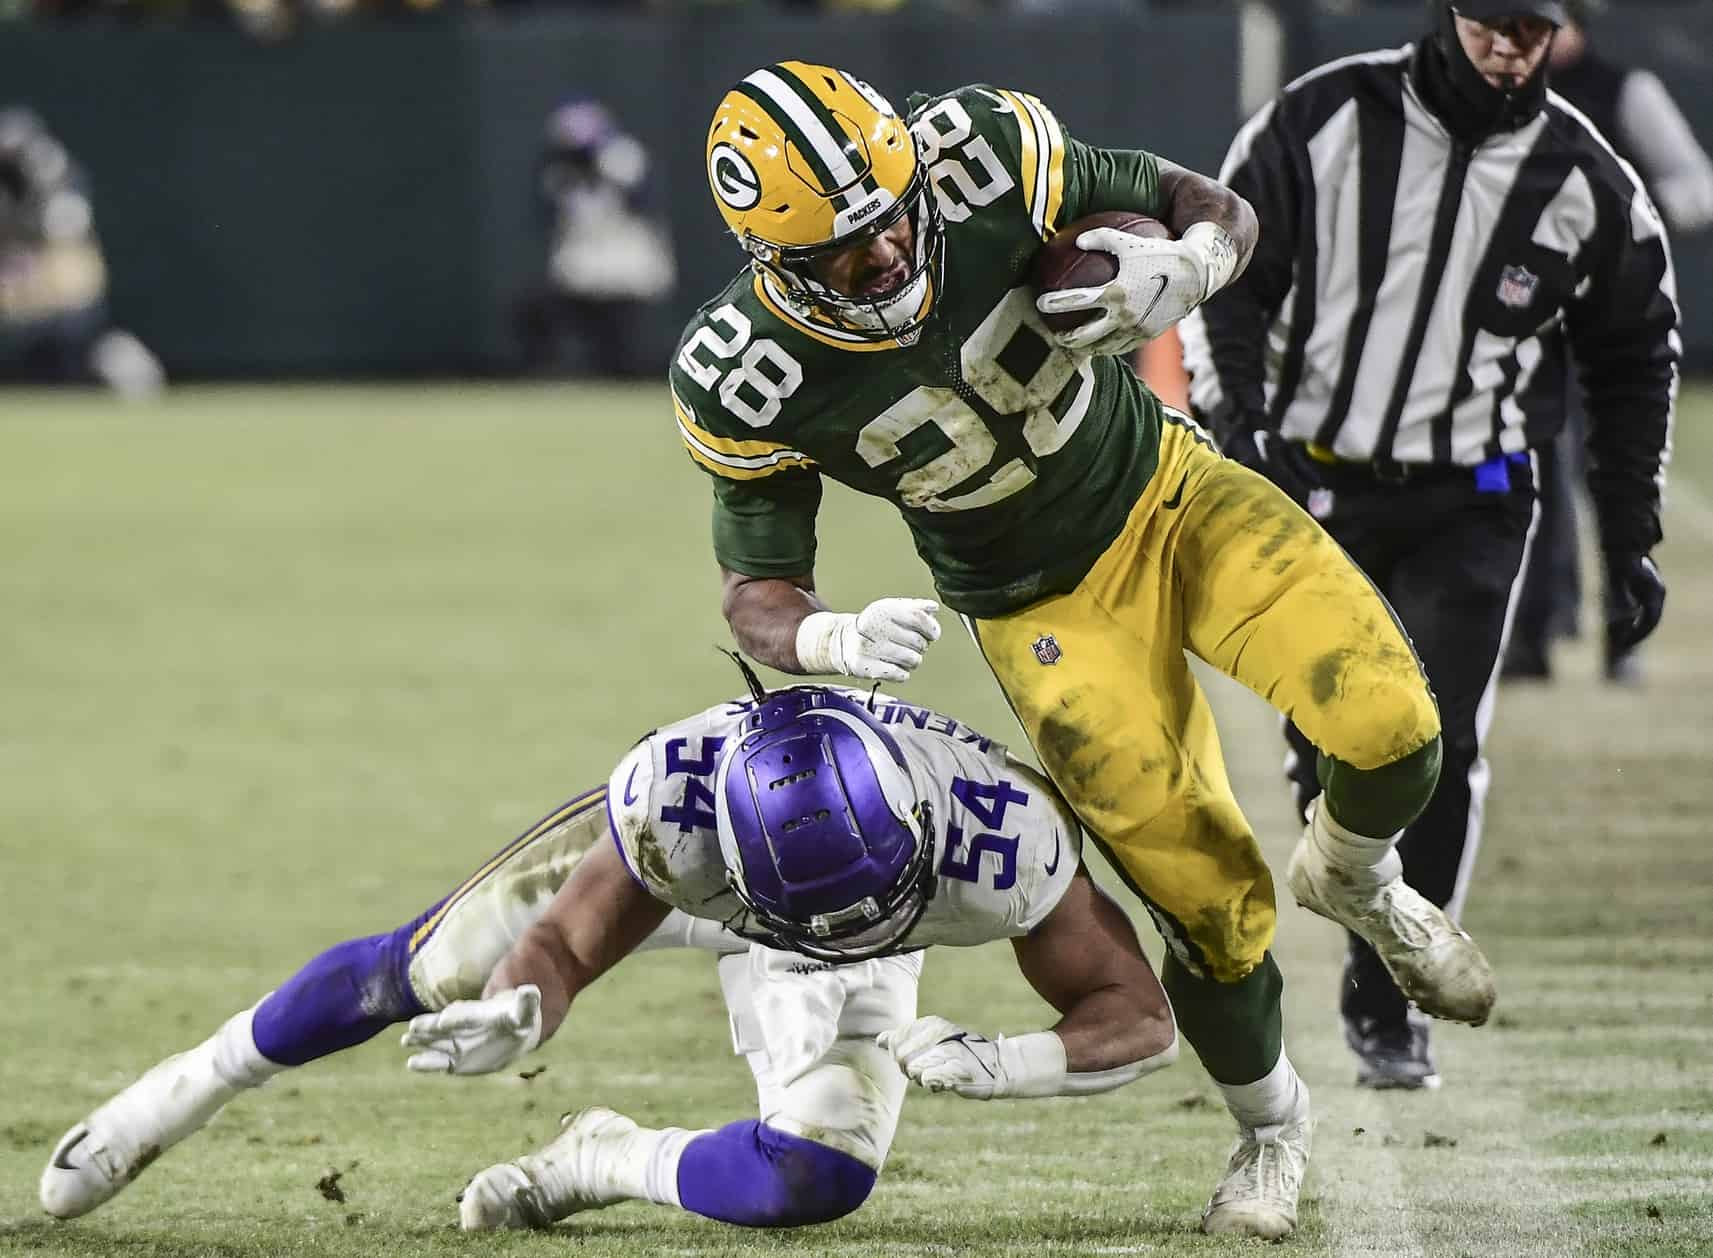 AJ Dillon Dynasty Profile 2022: The Packers RB1 of the future